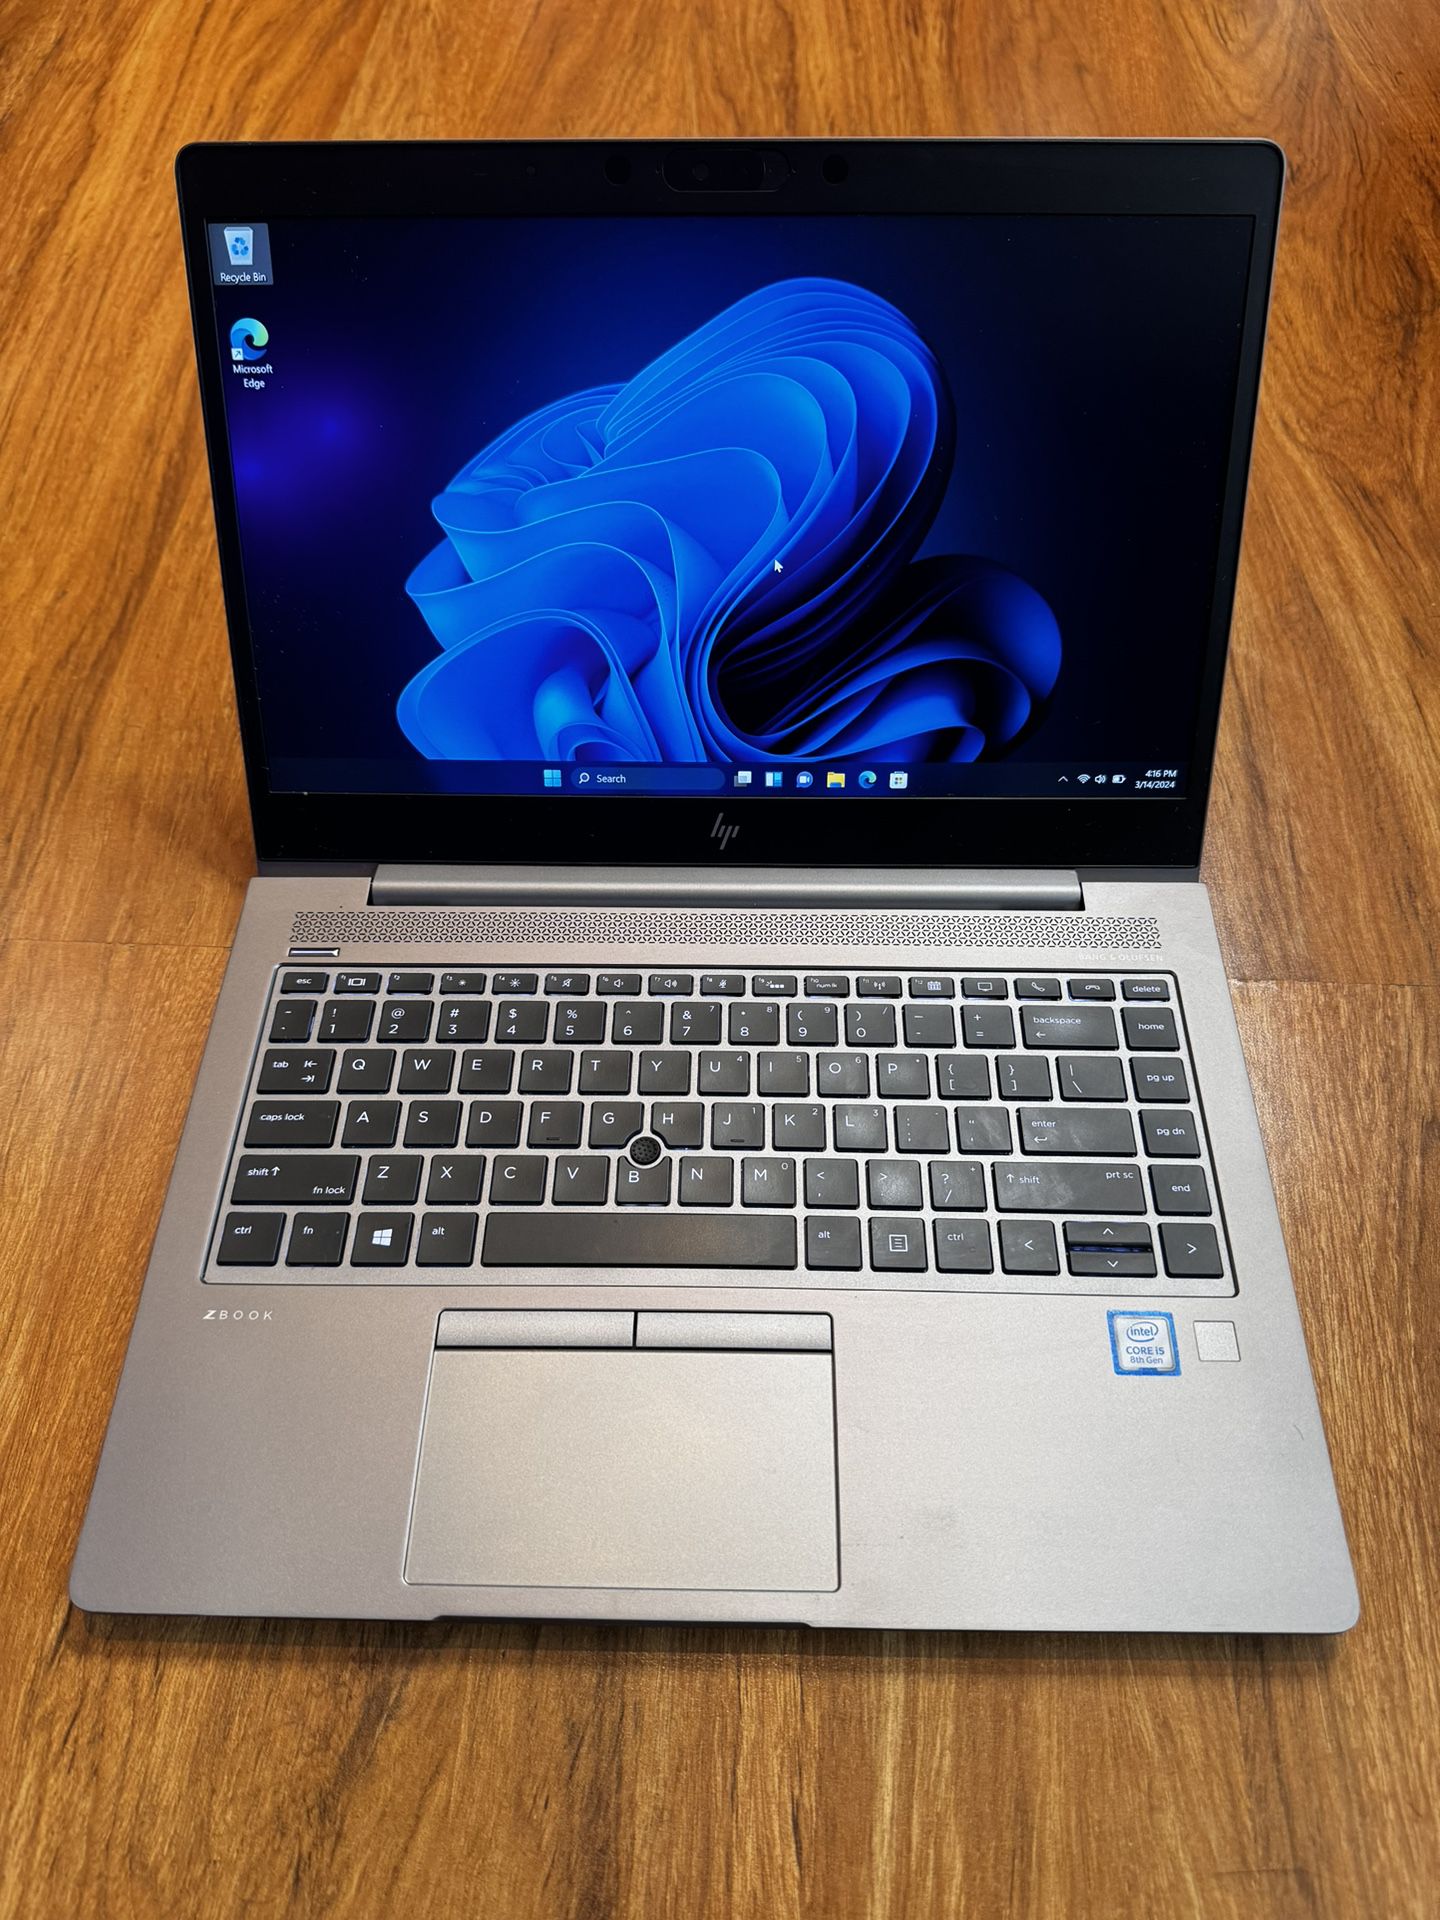 HP ZBook G6 i5 8th gen 8GB Ram 256GB SSD Windows 11 Pro 15”UHD Screen Laptop with charger in Excellent Working condition!!!!!  Specification: * core i